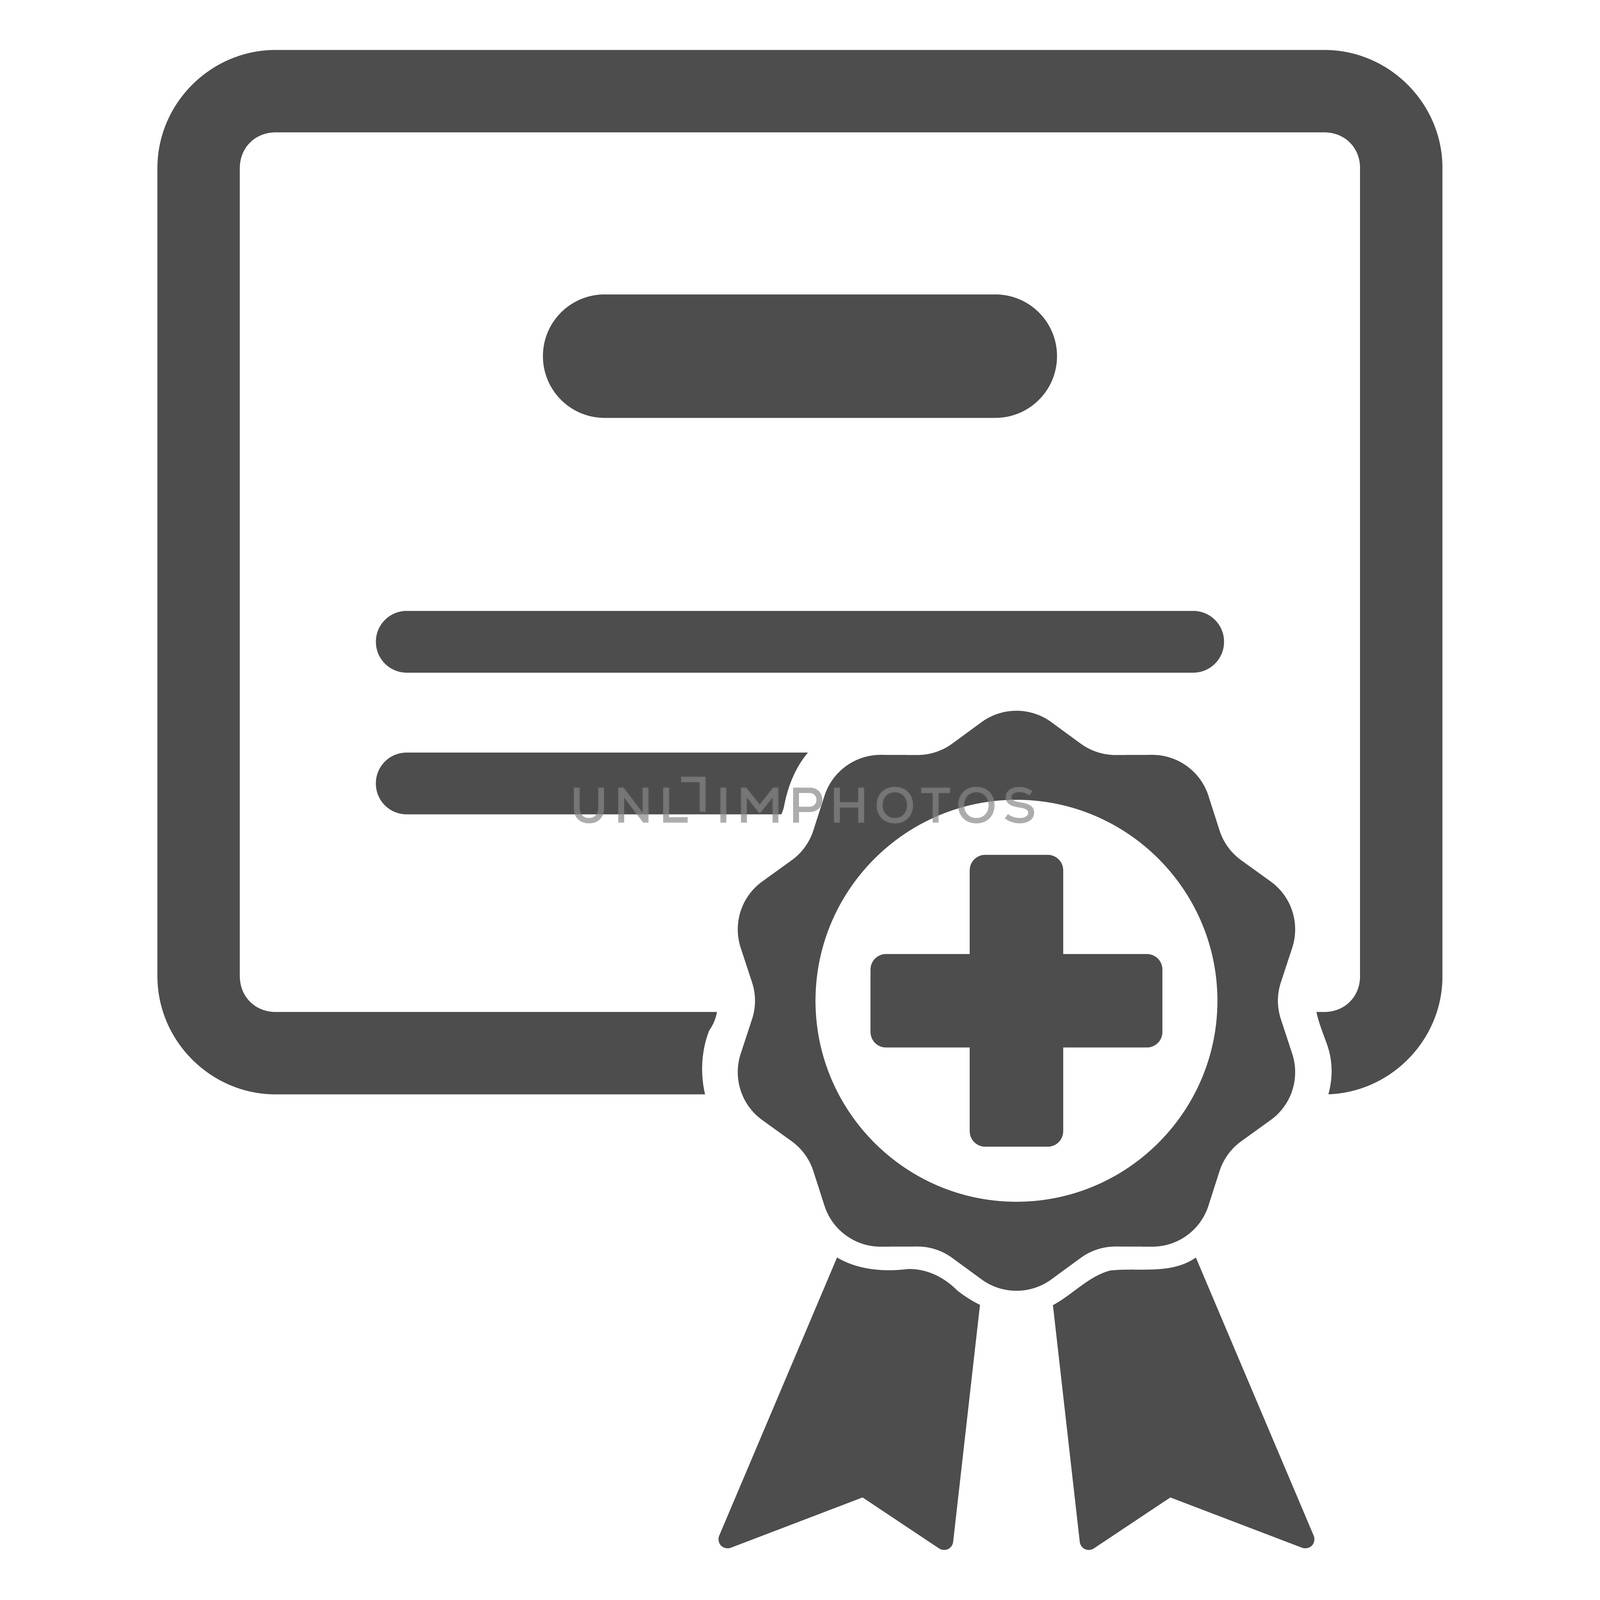 Medical Certificate raster icon. Style is flat symbol, gray color, rounded angles, white background.